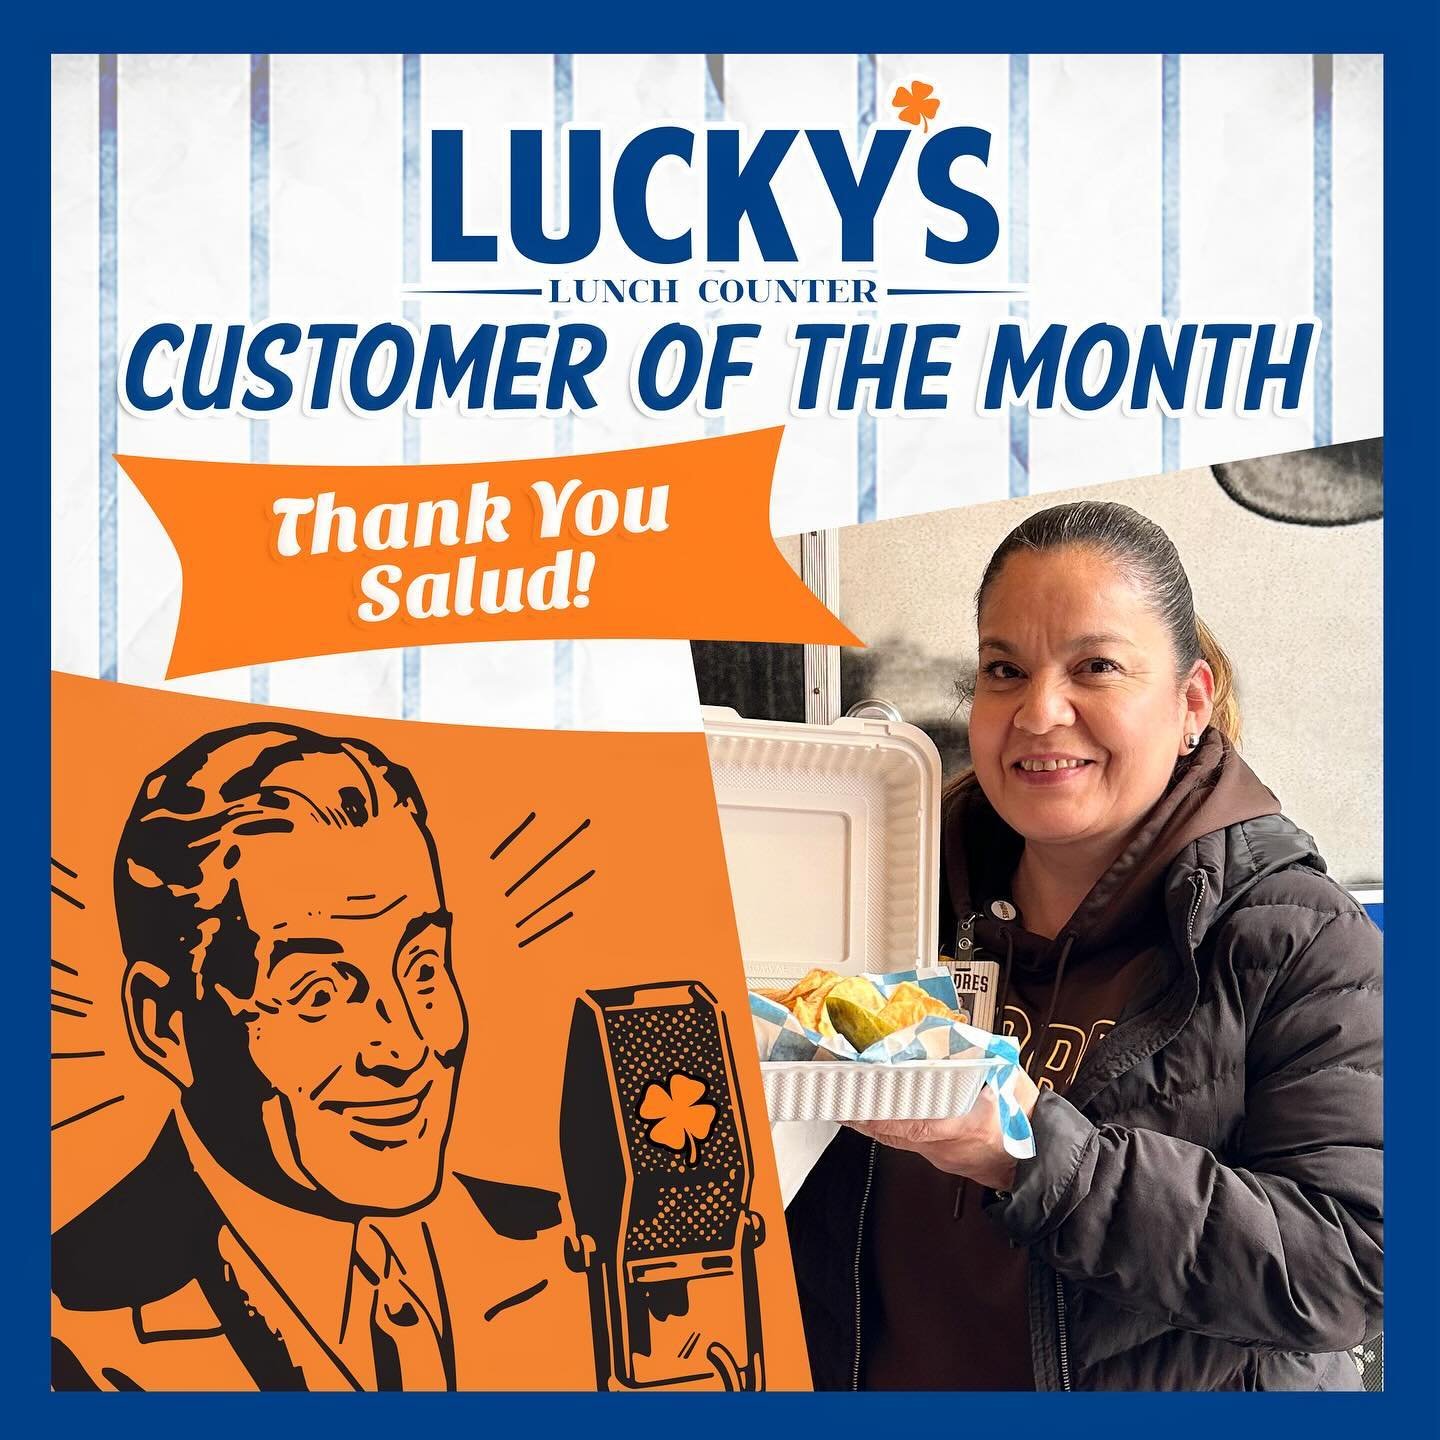 Cheers to our May Customer of the Month, SALUD! 🍀 Her favorite Lucky&rsquo;s dish is the Chipotle Chicken Sandwich with chips. Thanks for making us feel so LUCKY!